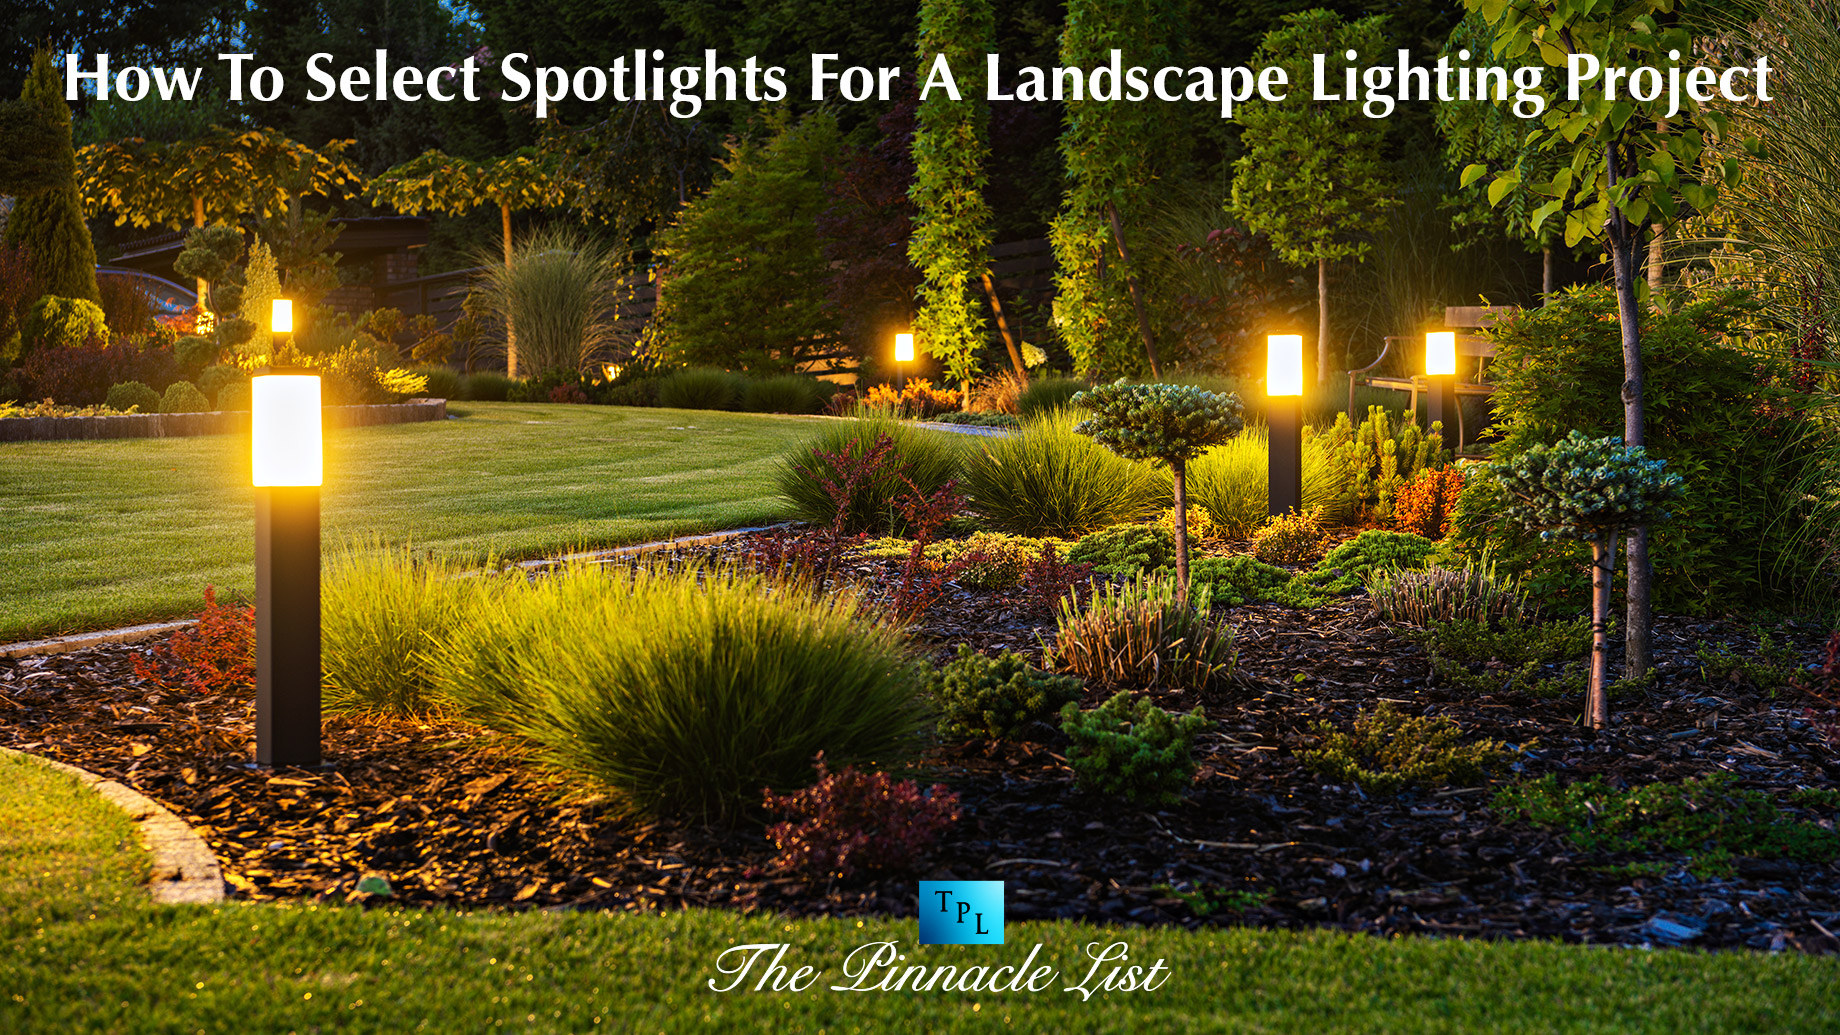 How To Select Spotlights For A Landscape Lighting Project